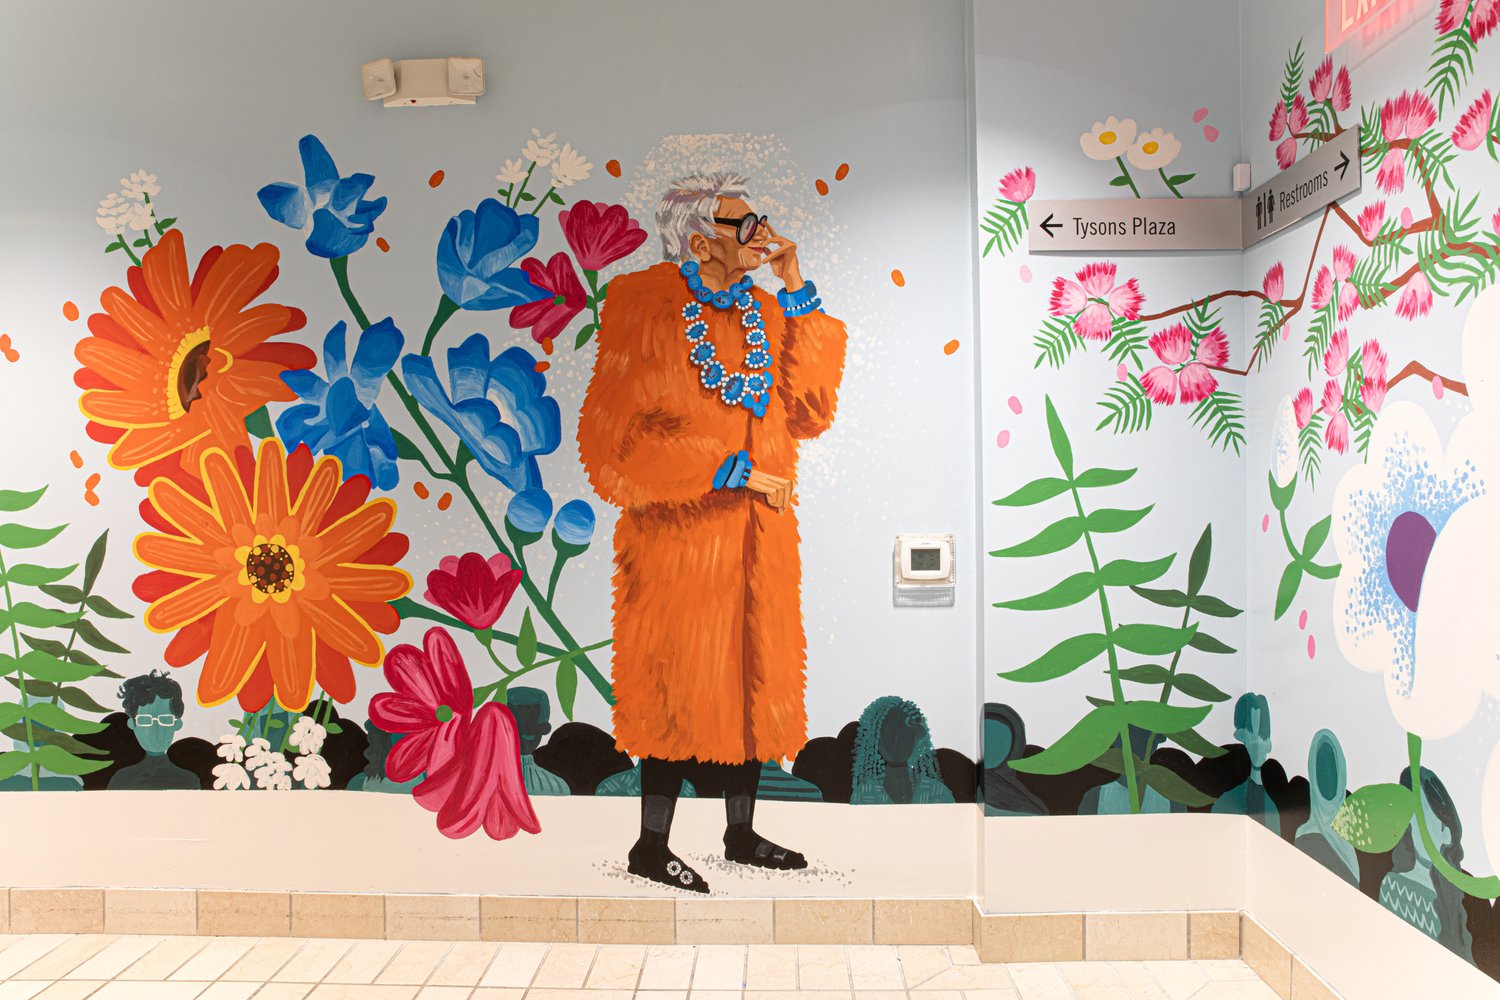 Emely Ramos School of Art student painted mural at Tysons Corner mall